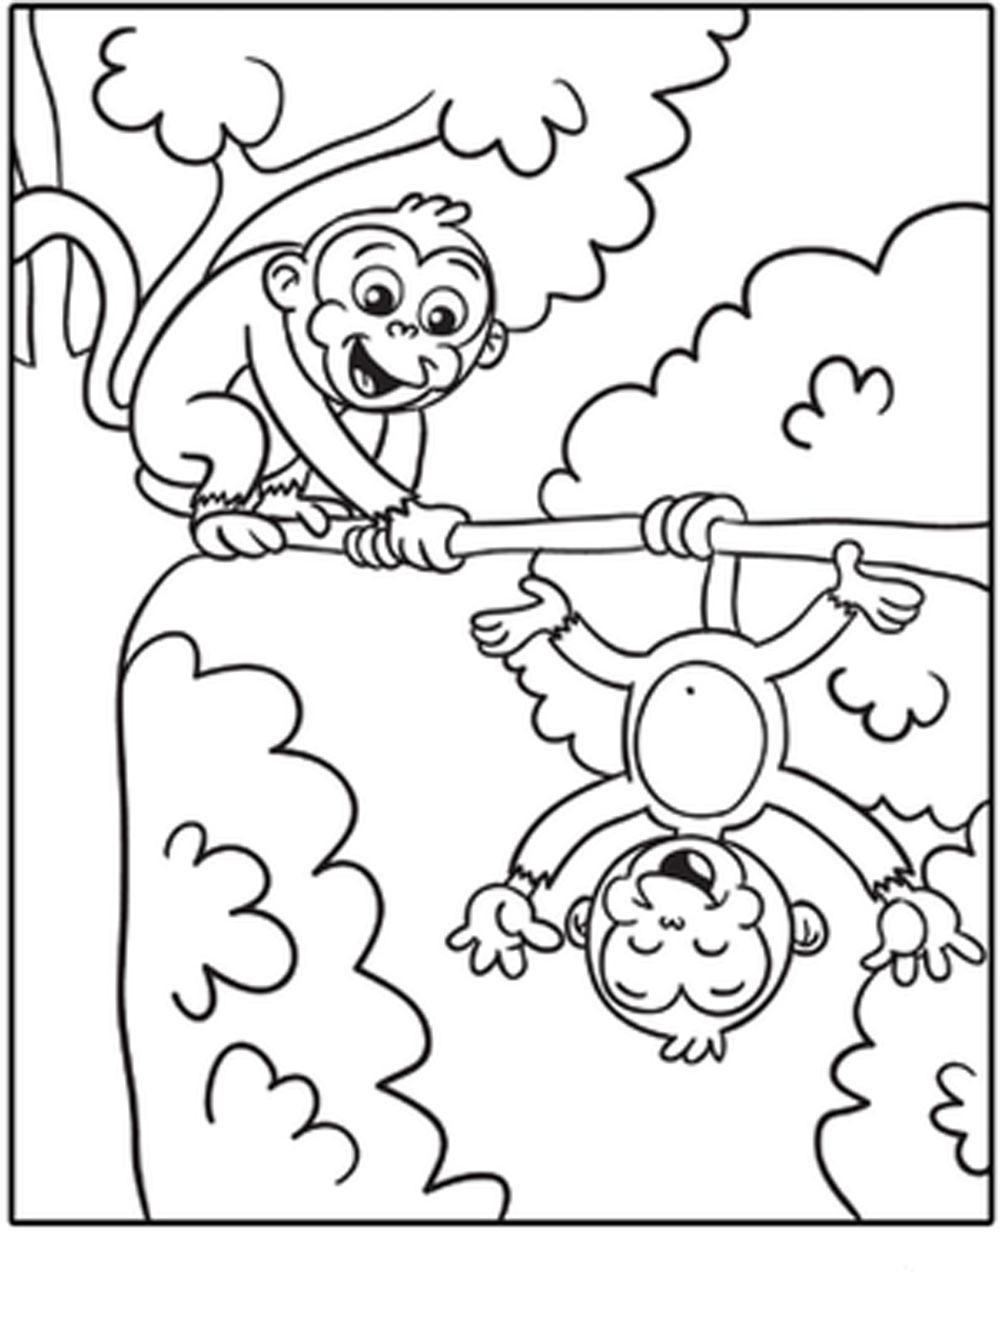 Monkey Printable Coloring Pages
 free printable monkey coloring pages